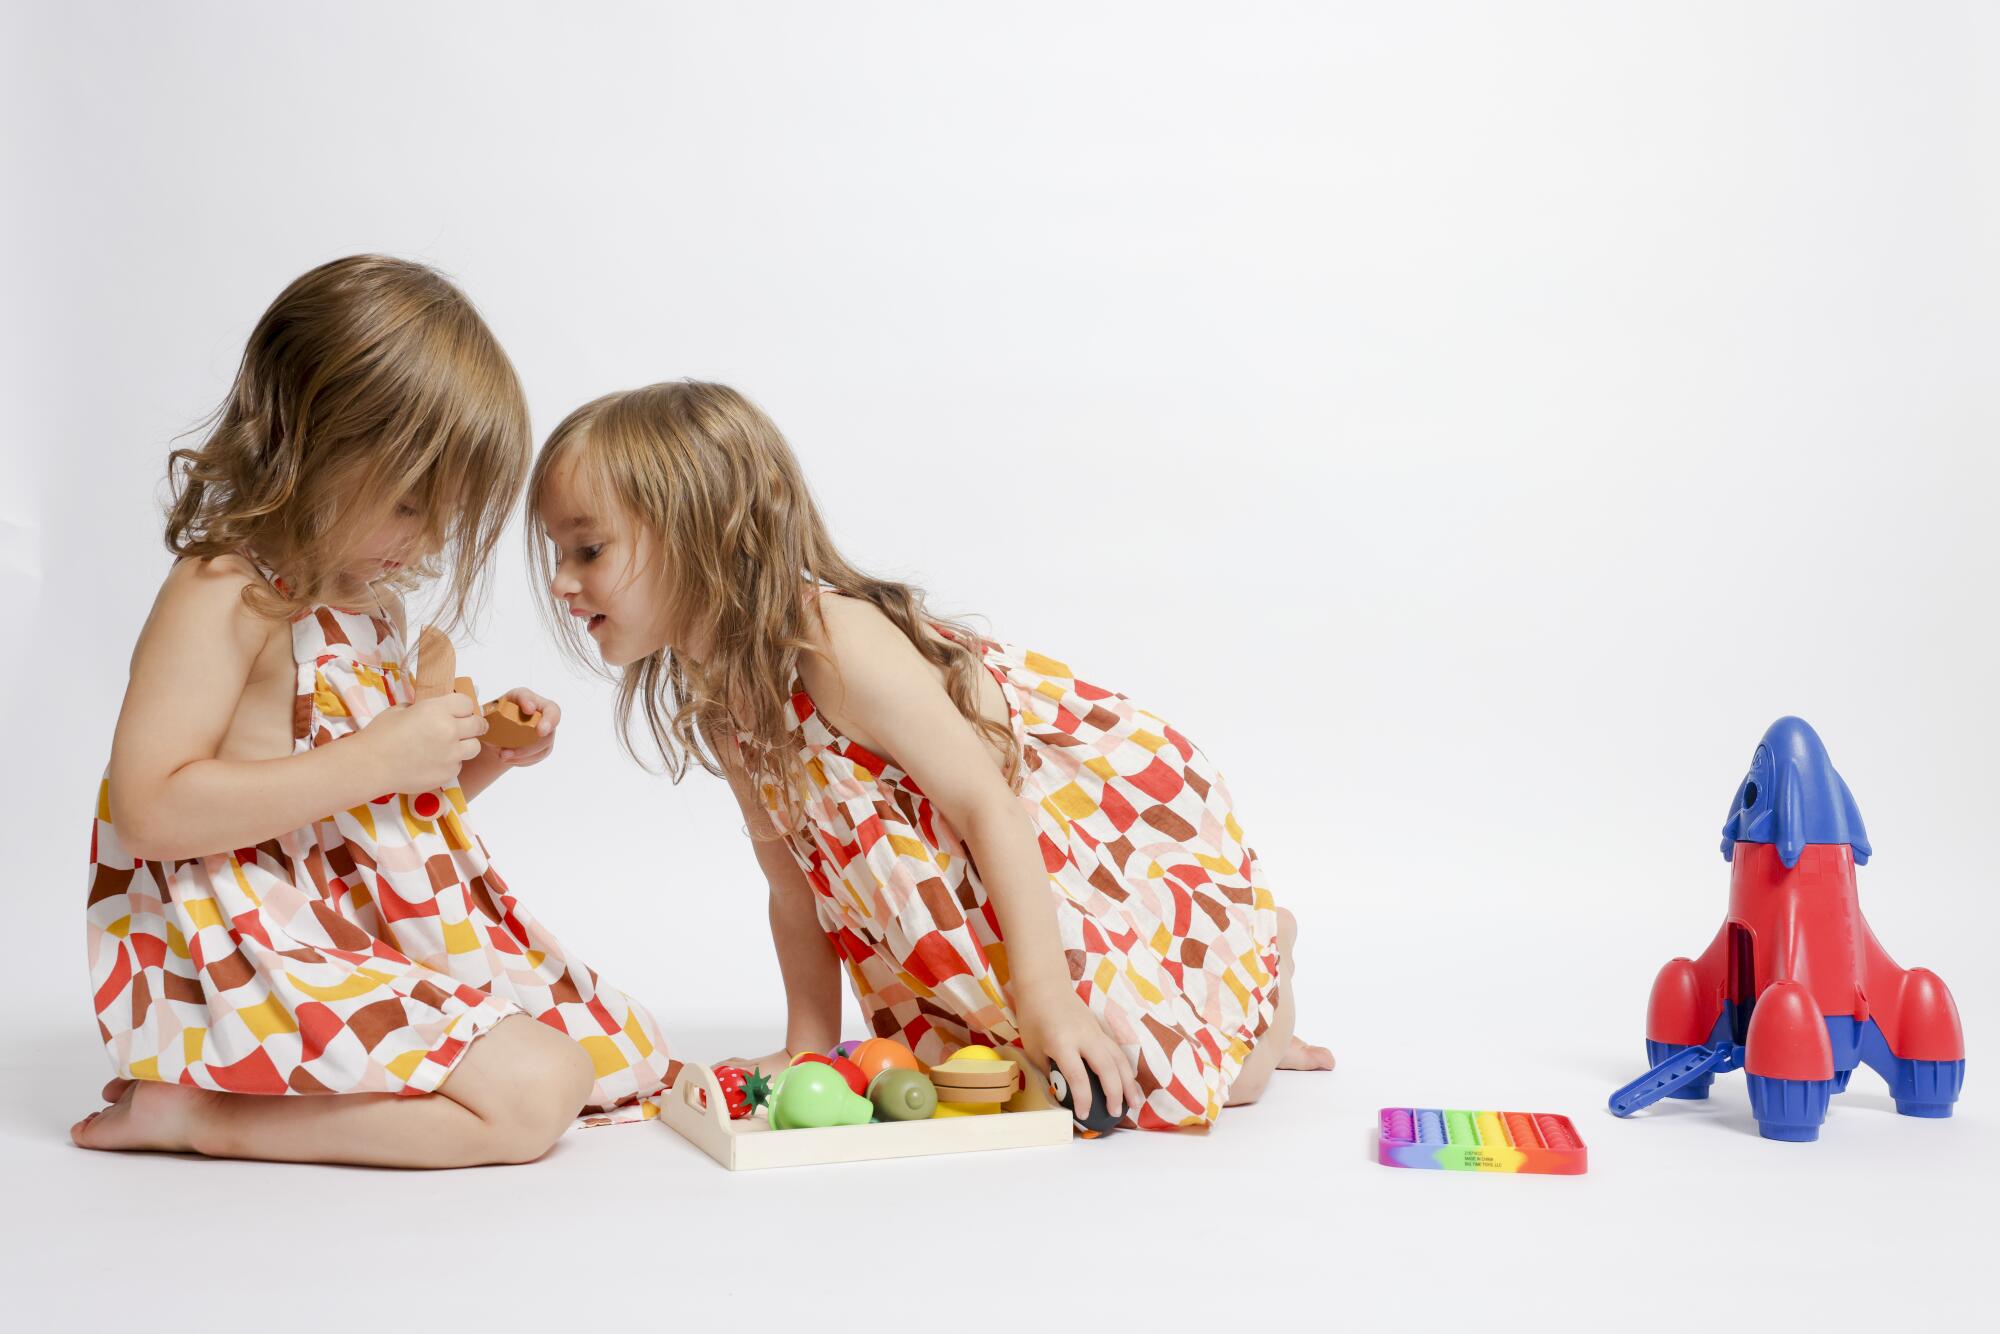 River and Penny Atchison, left and right, play with wooden and plastic toys at their home.